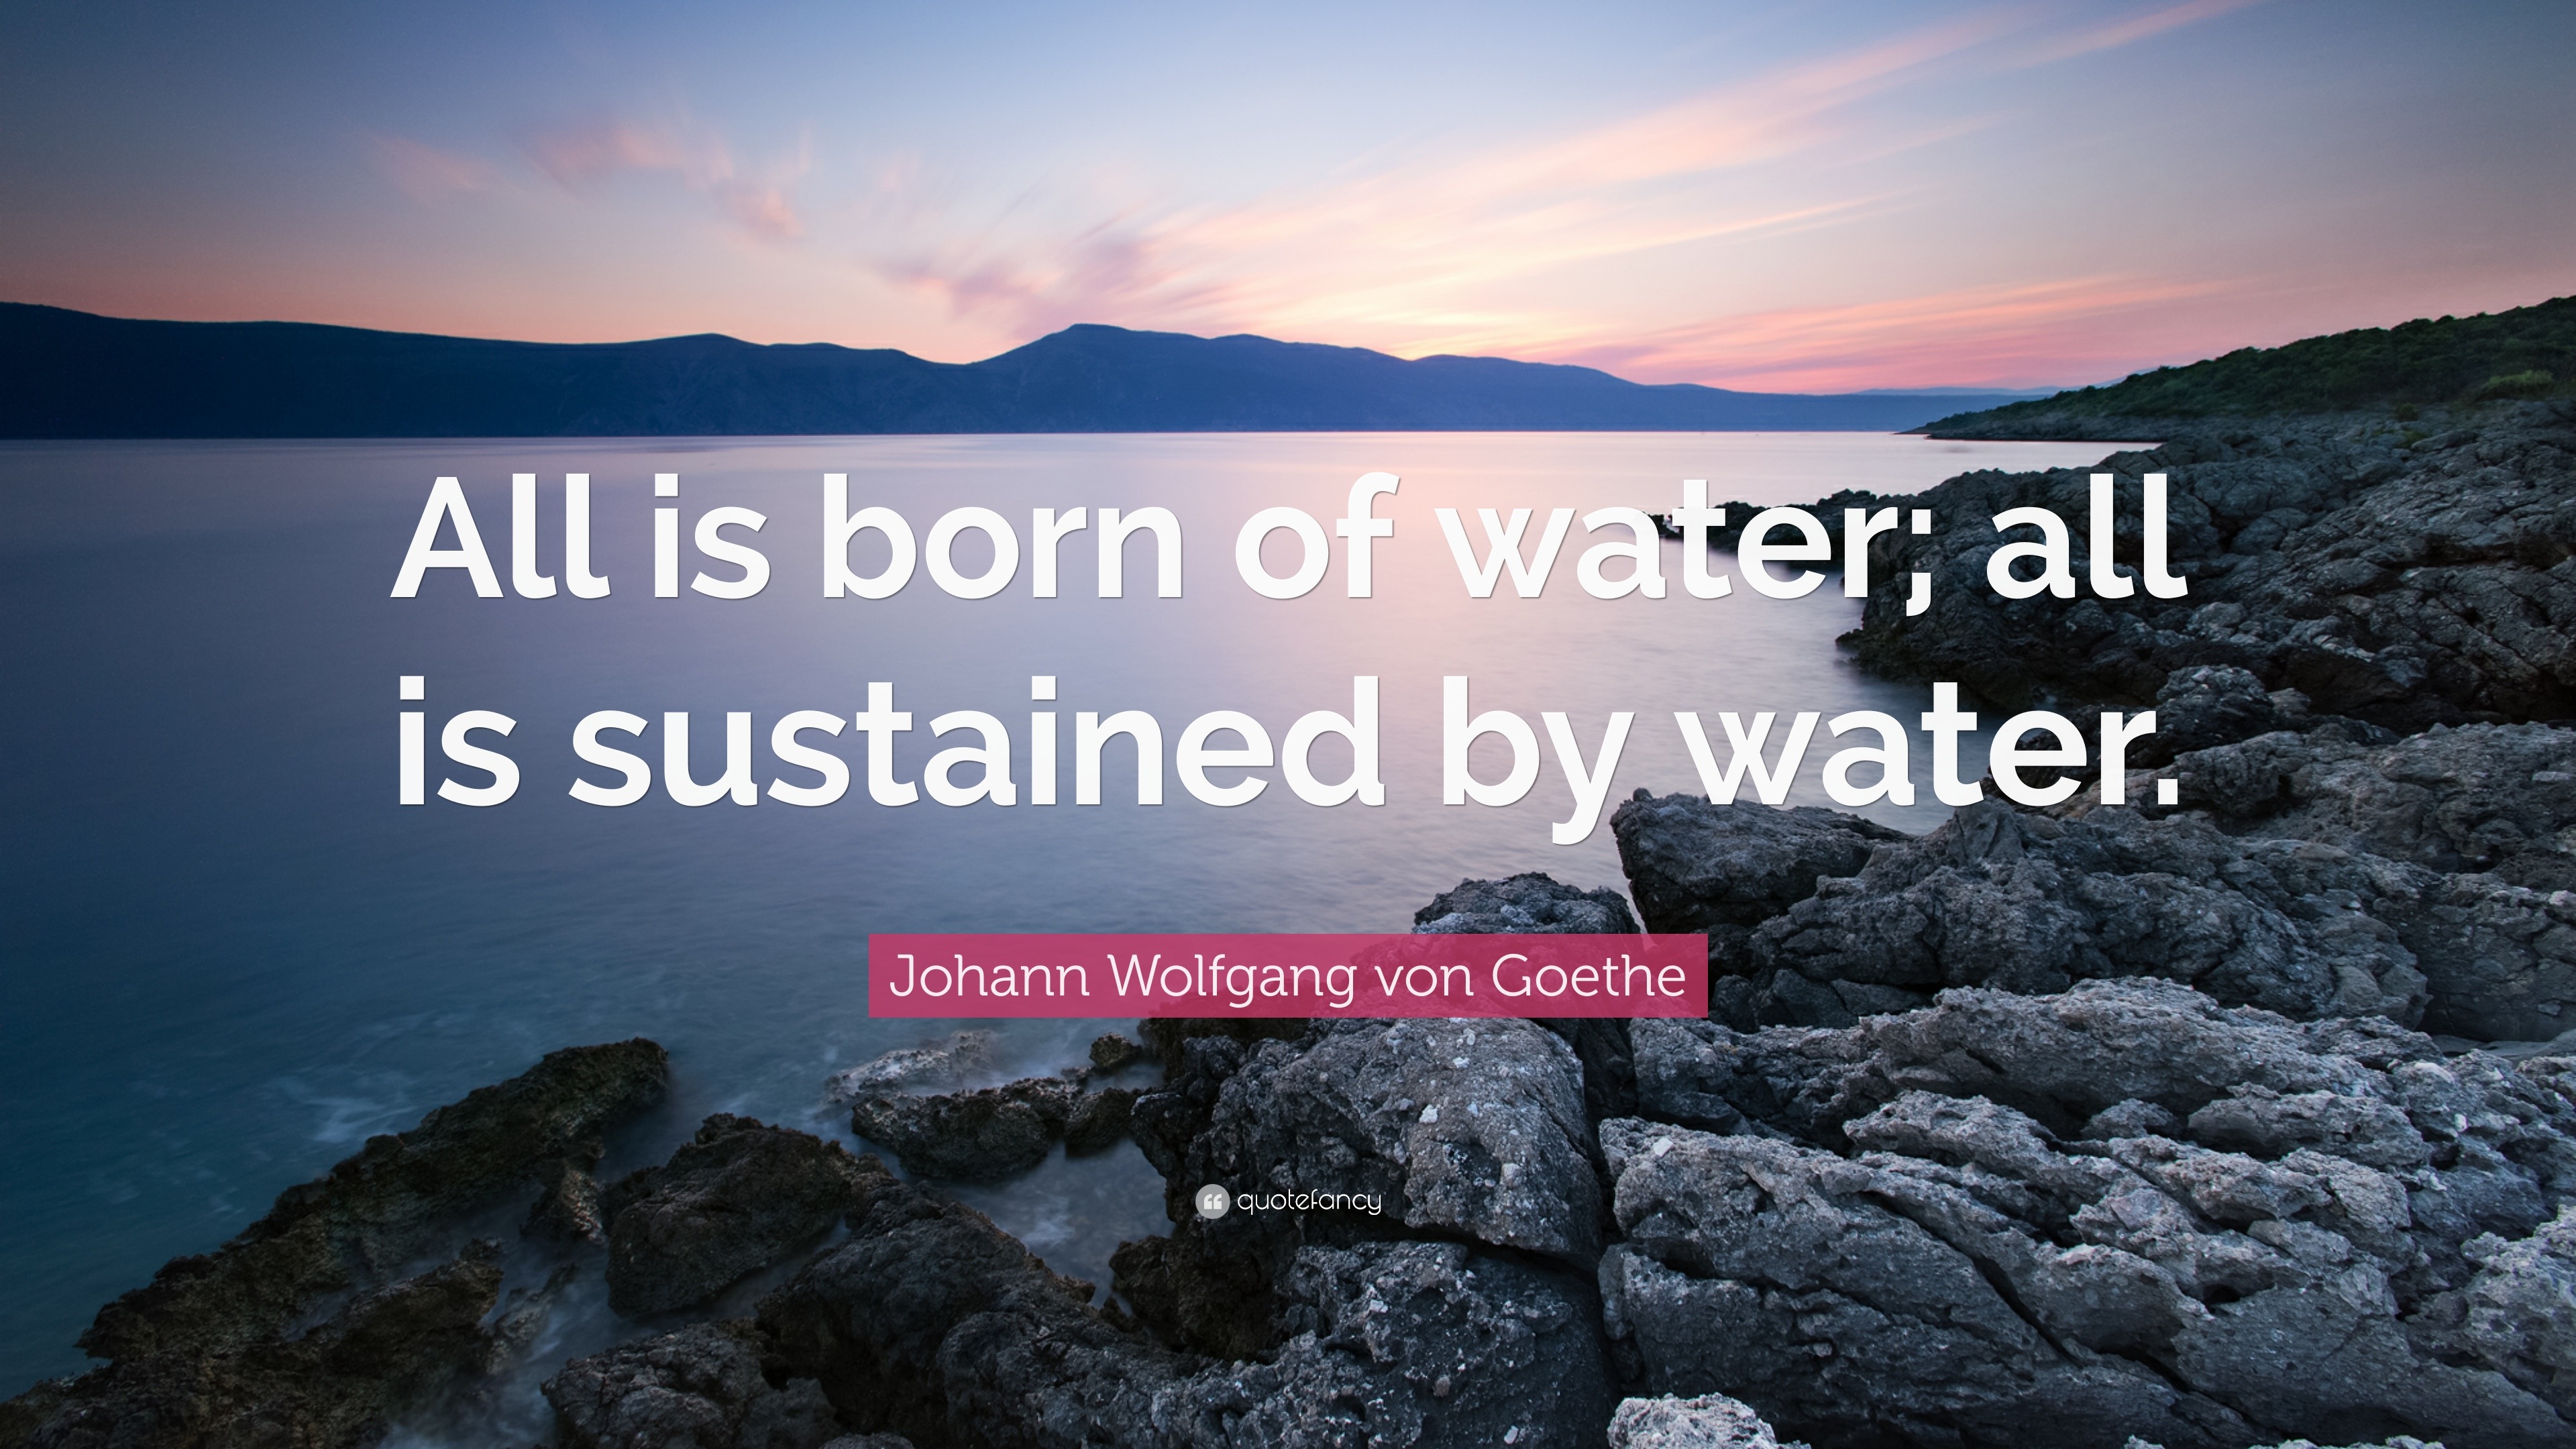 Johann Wolfgang von Goethe Quote: “All is born of water; all is ...